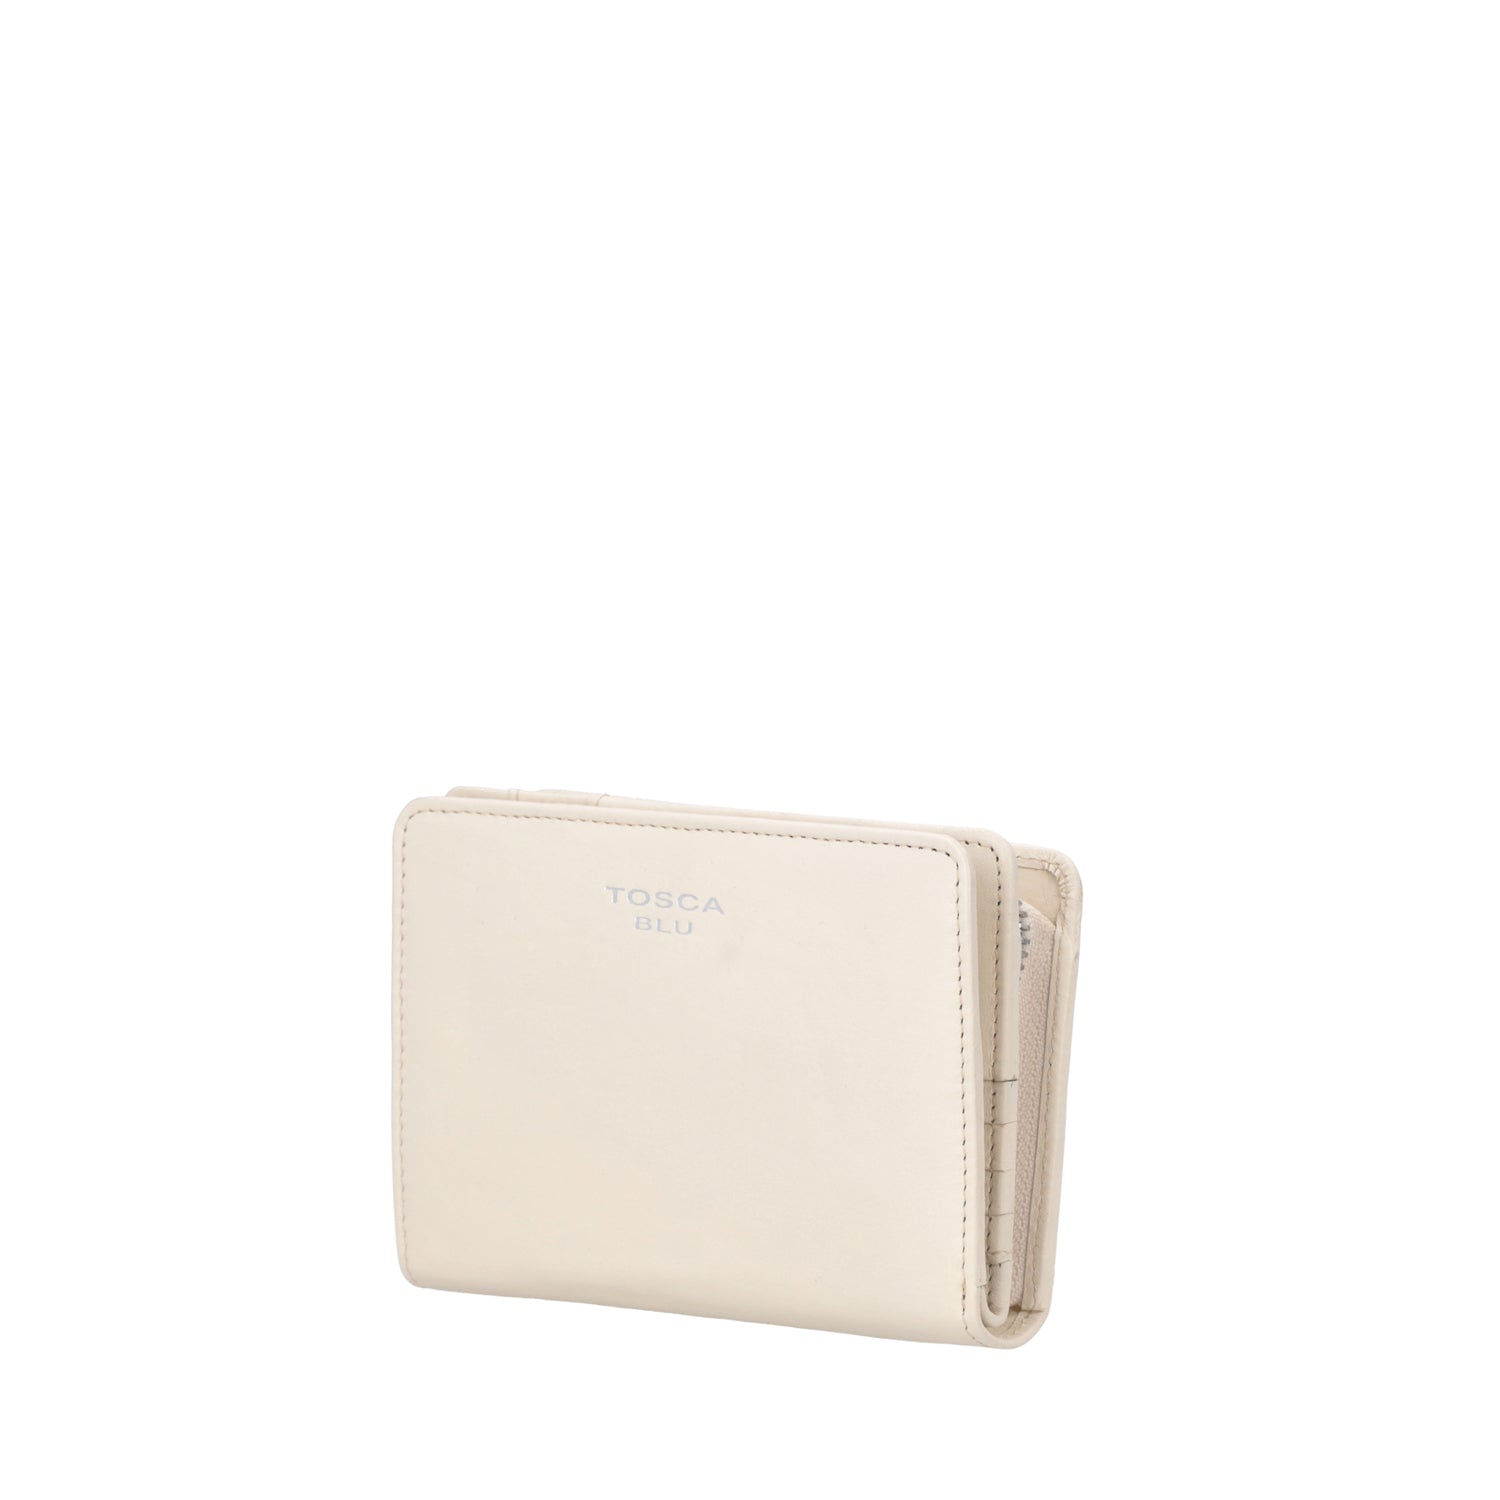 NATURAL BASIC WALLETS WALLET IN LEATHER